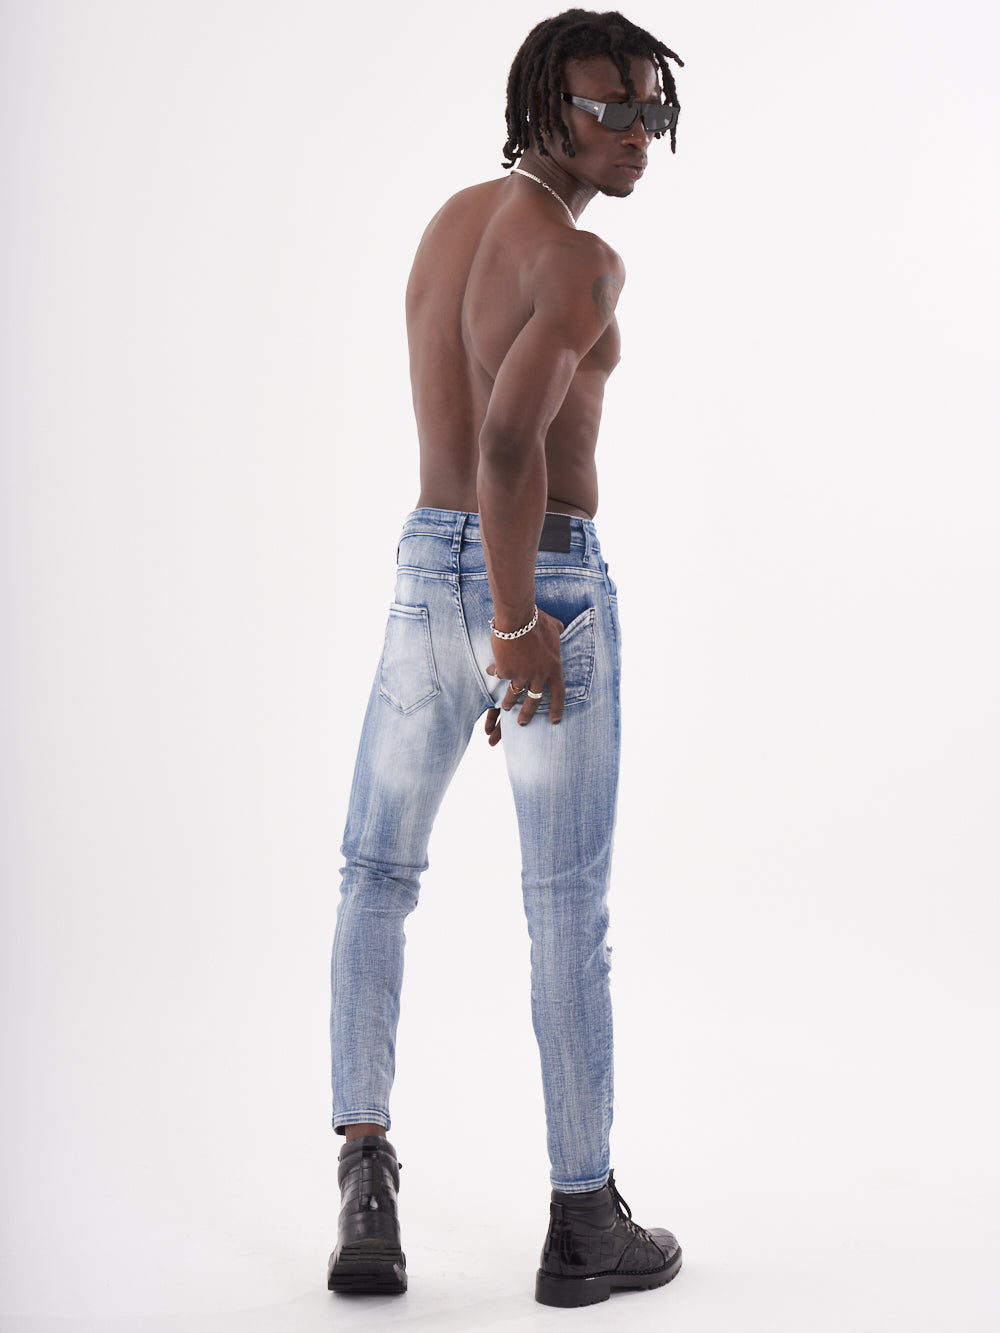 A man in blue jeans posing in front of a white background, holding the MUTANT.